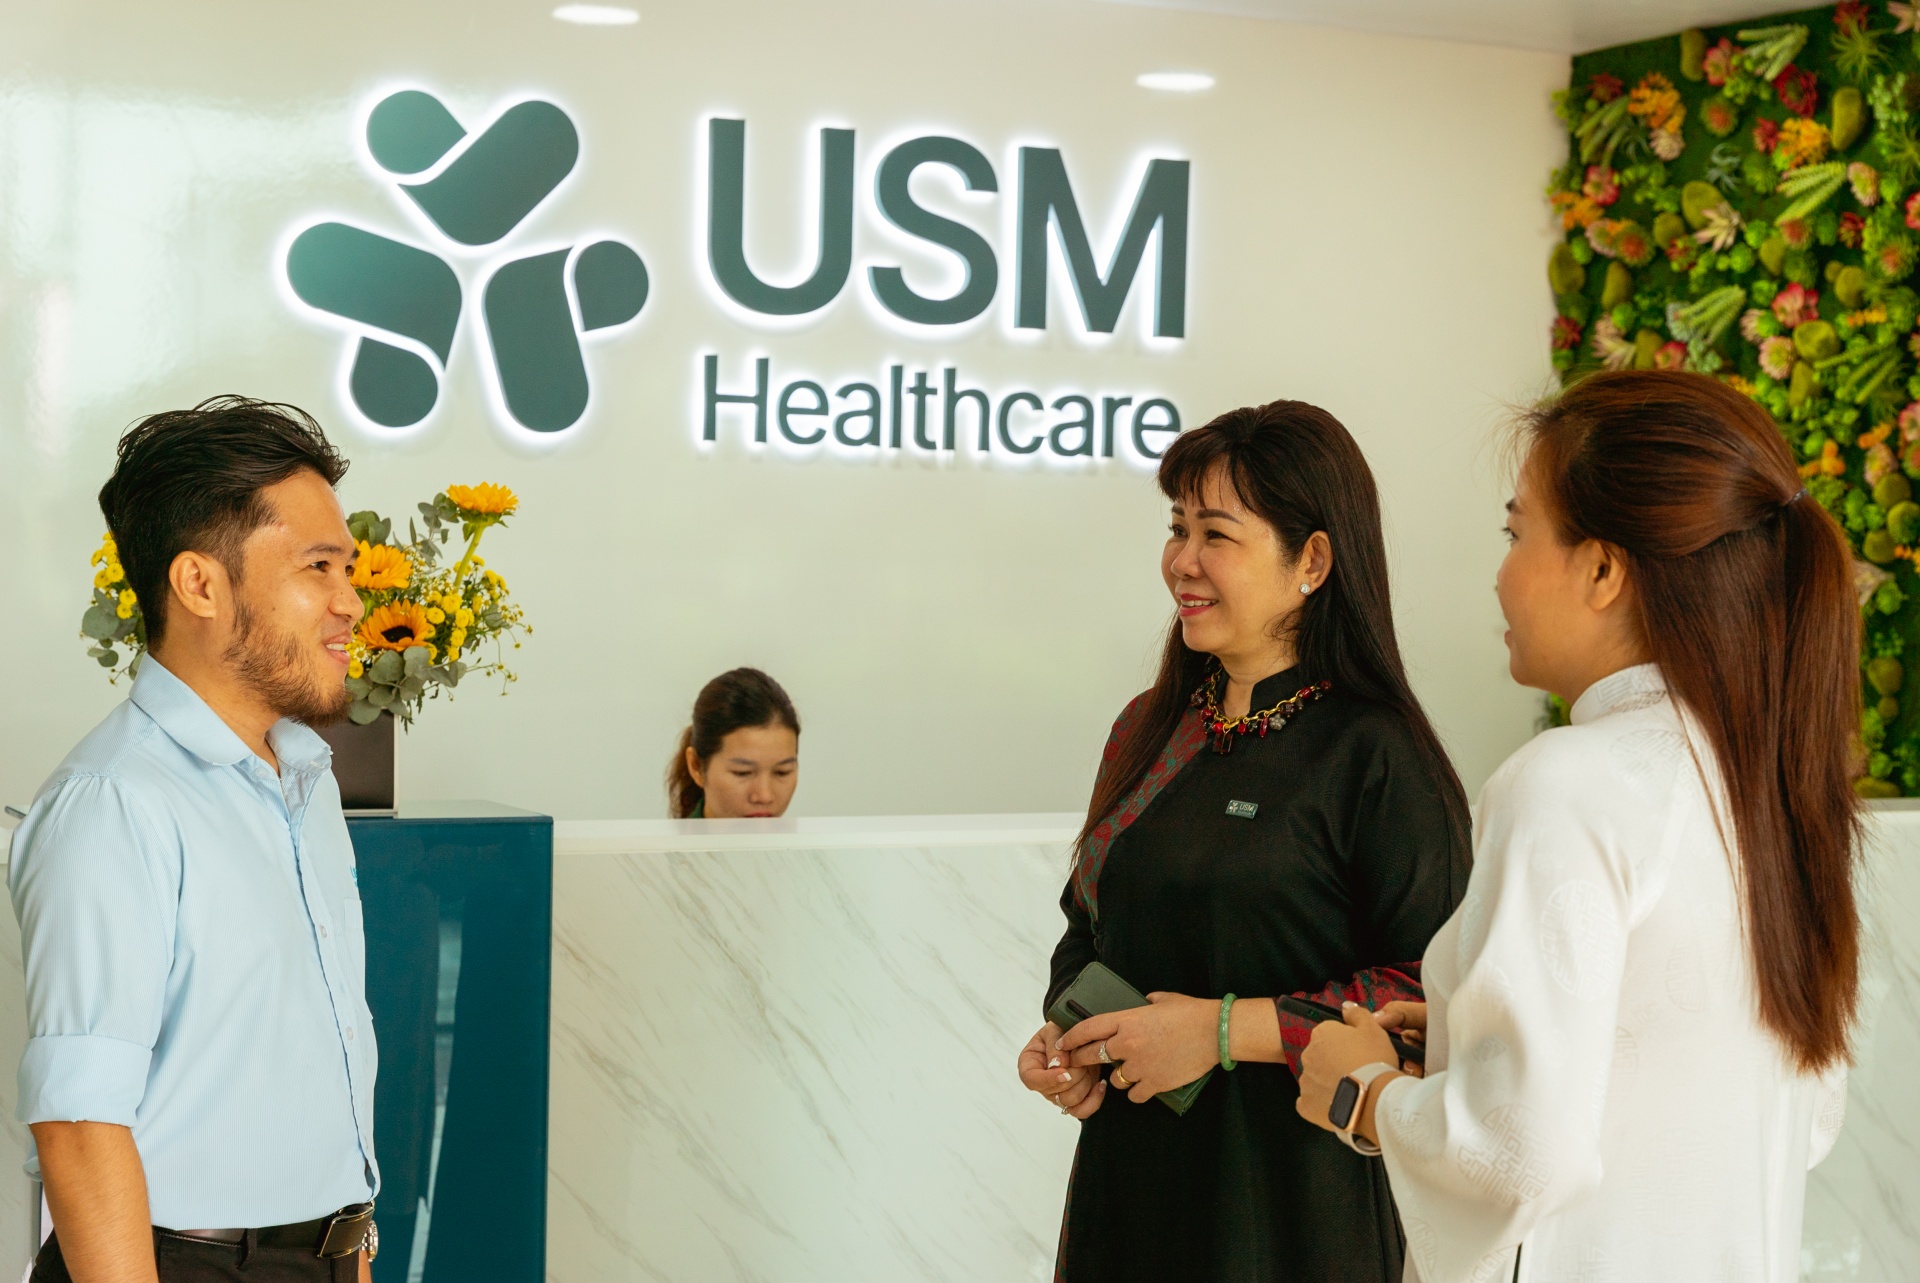 Sweef Capital invests in USM Healthcare